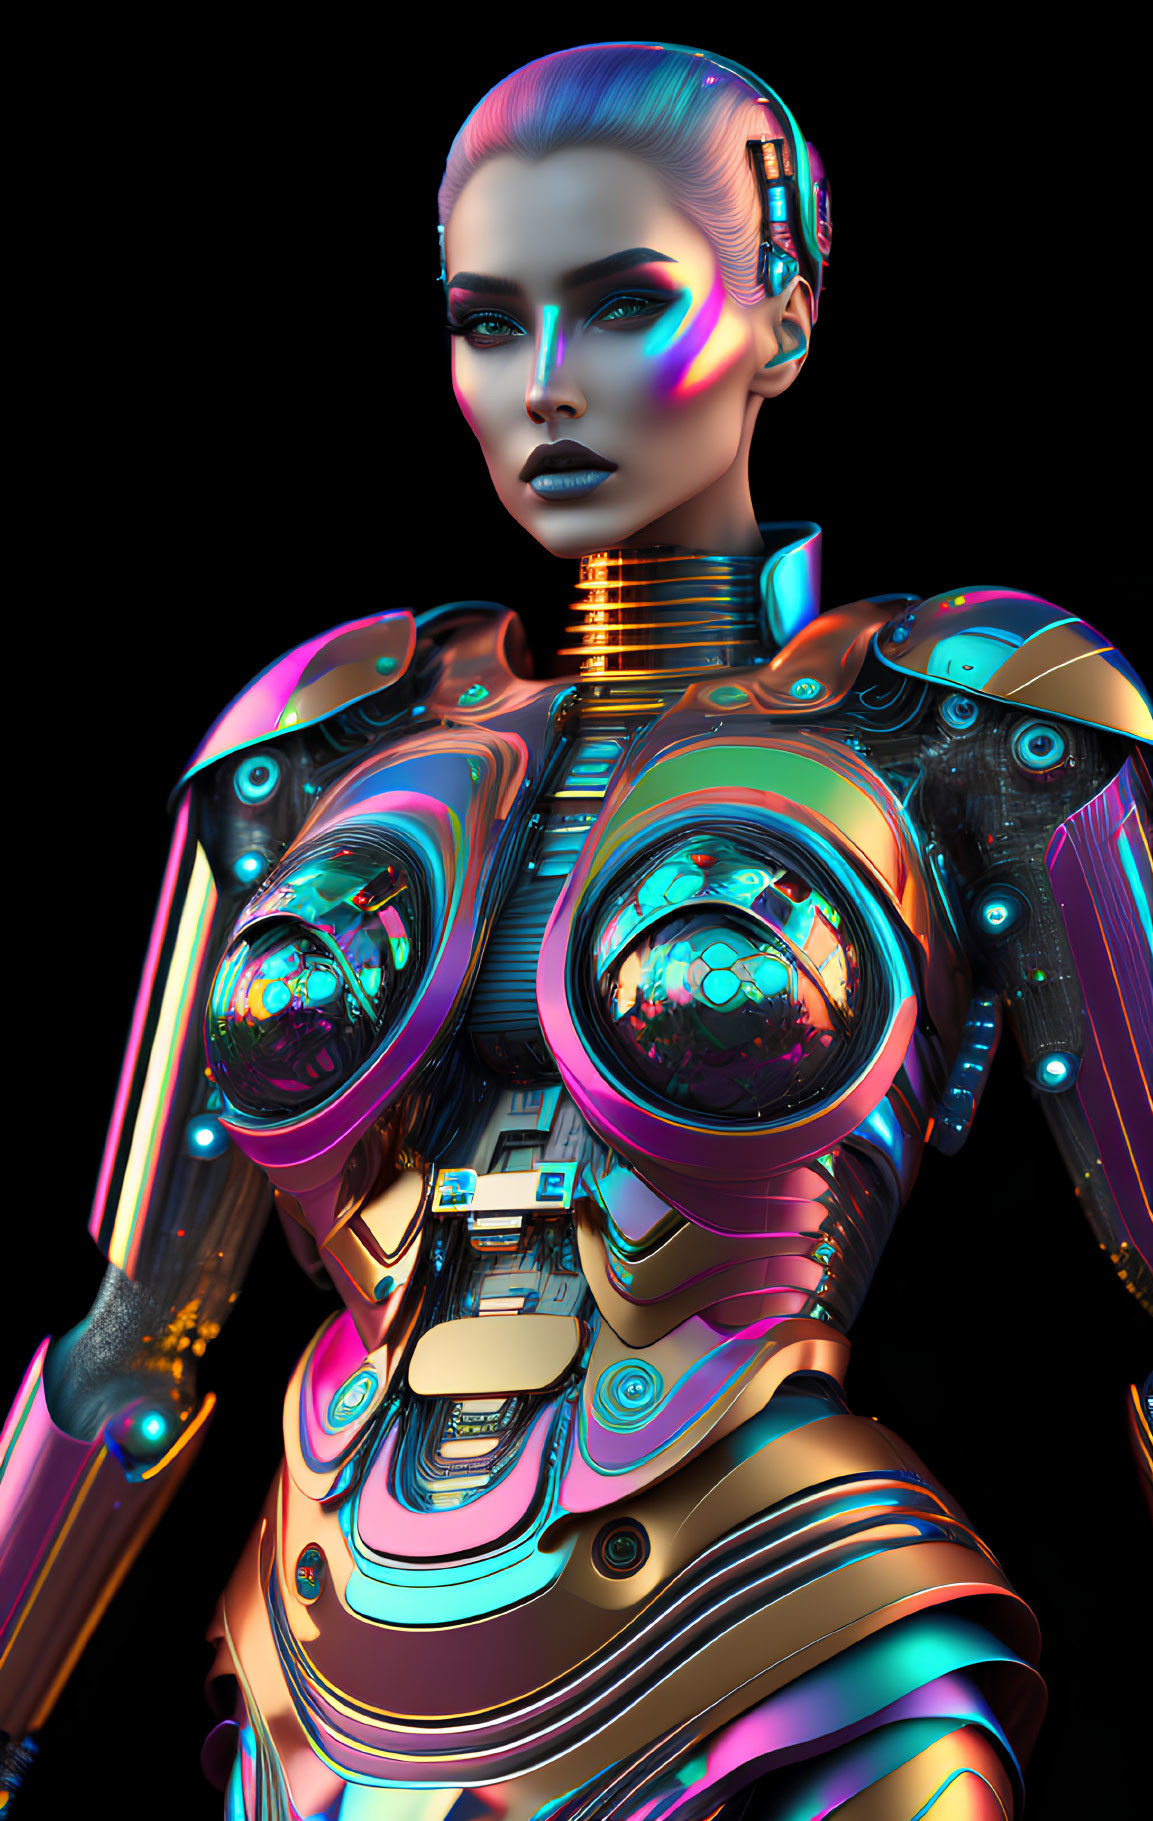 Detailed Cybernetic Suit on Female Robot with Iridescent Lighting